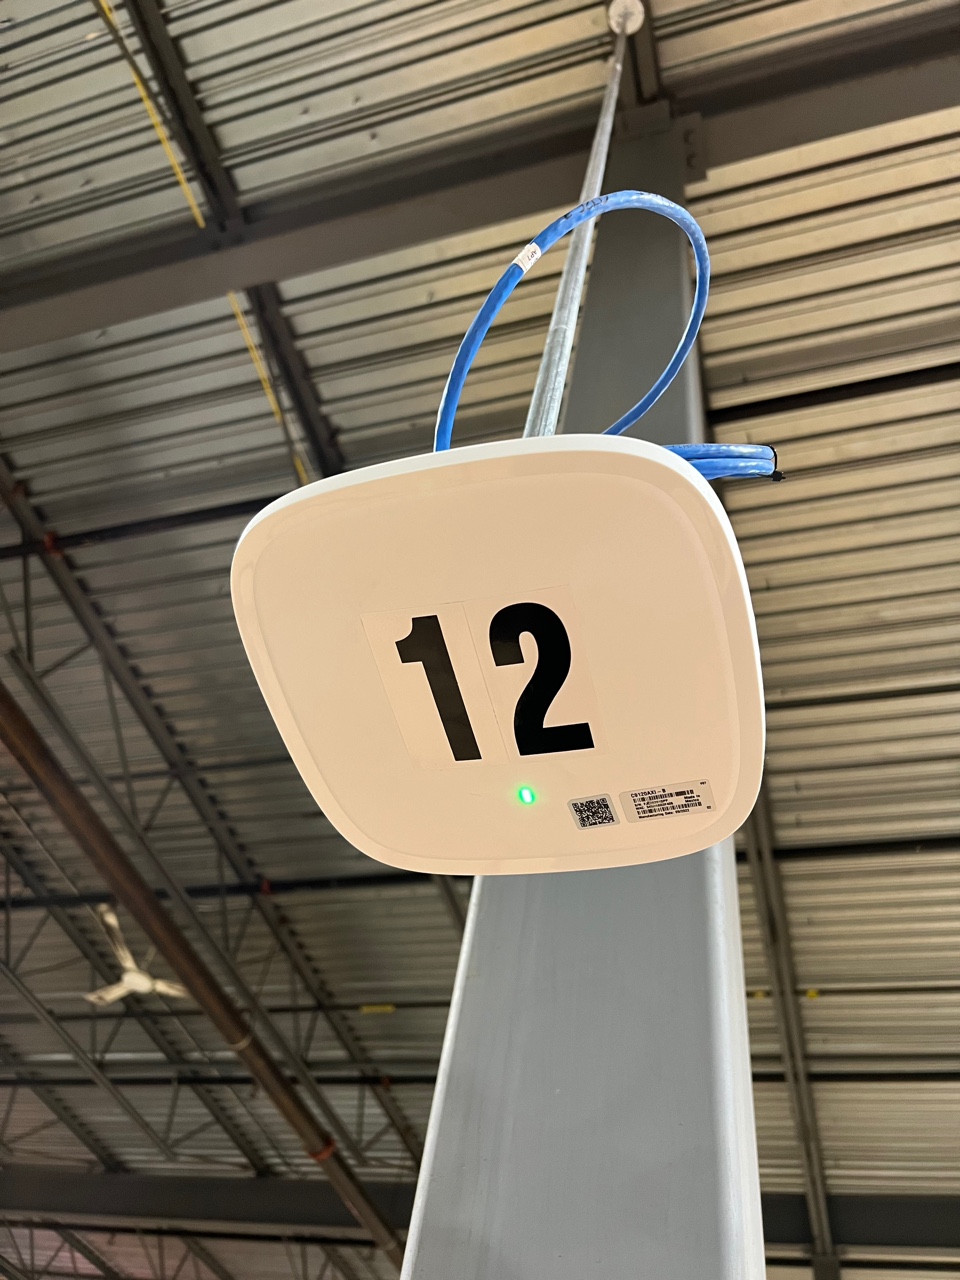 Wi-fi Access Point (AP) set up overhead at a warehouse.